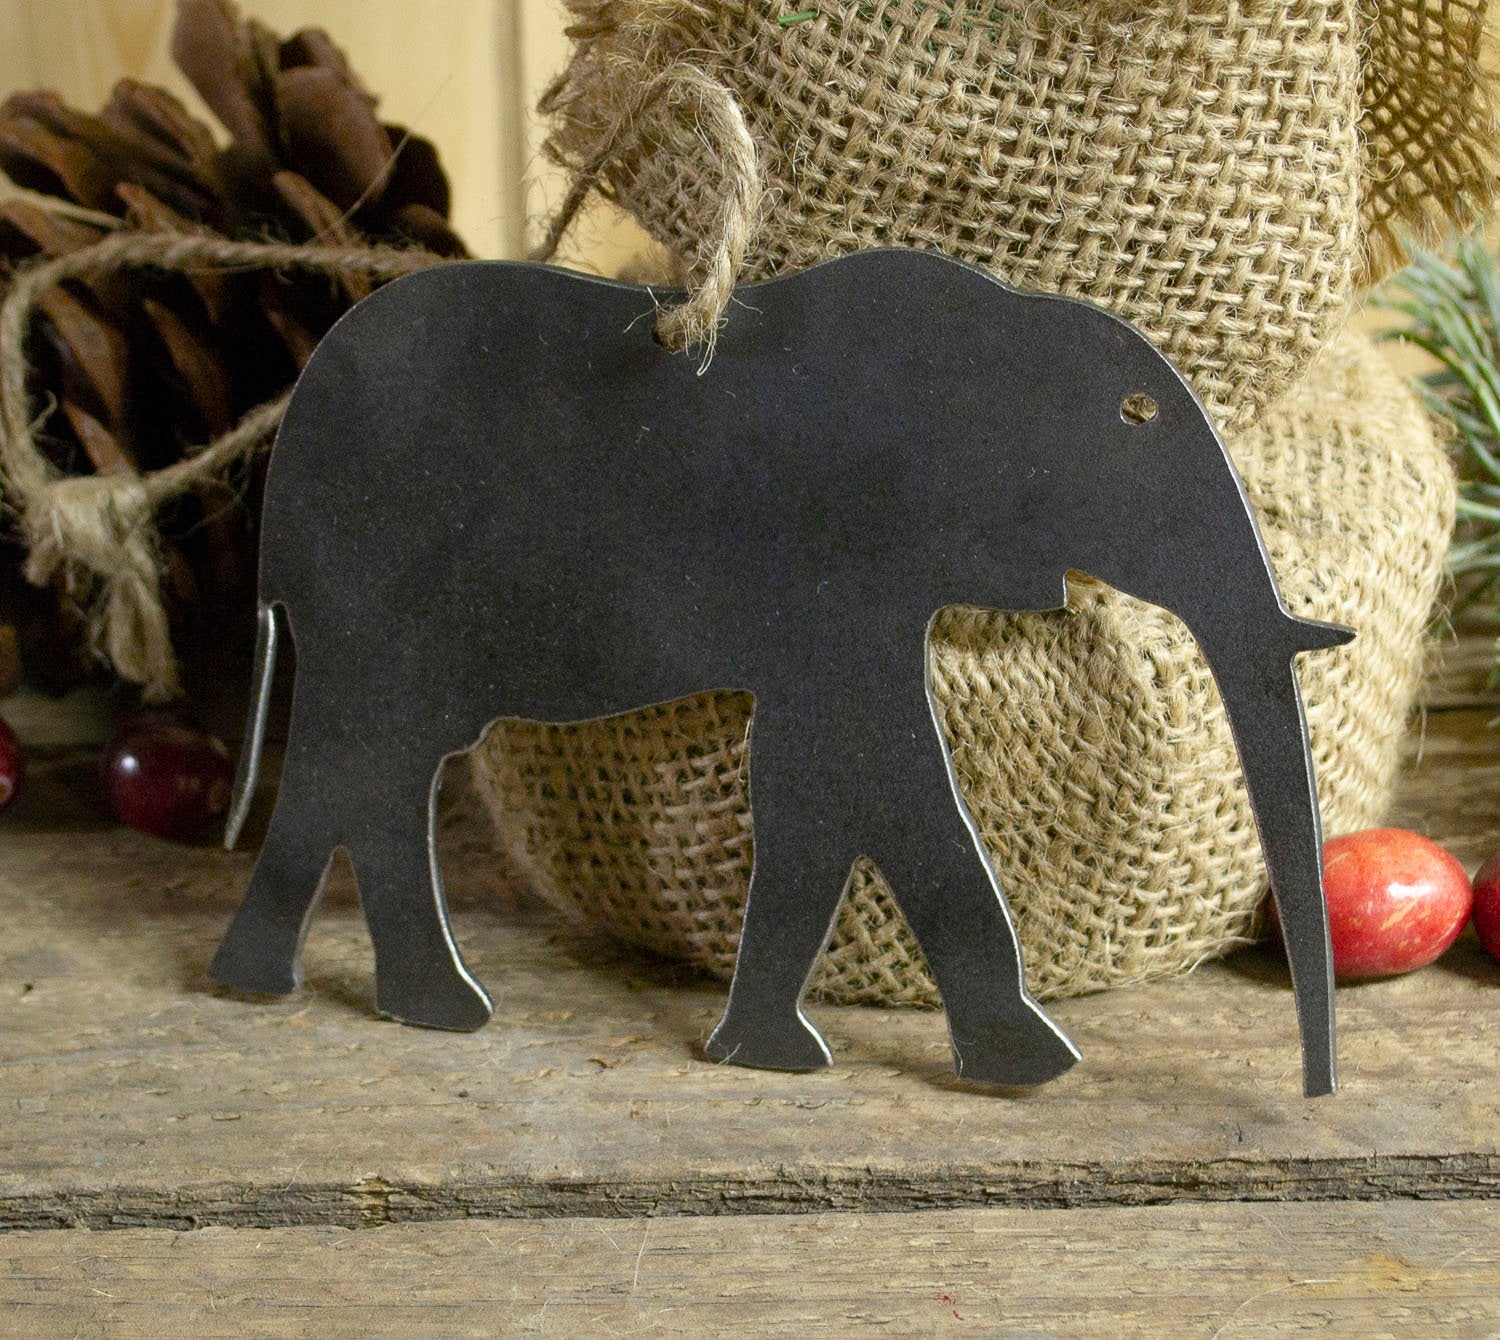 Elephant Metal Christmas Ornament Tree Stocking Stuffer Party Favor Holiday Decoration Raw Steel Gift Recycled Nature Home Decor